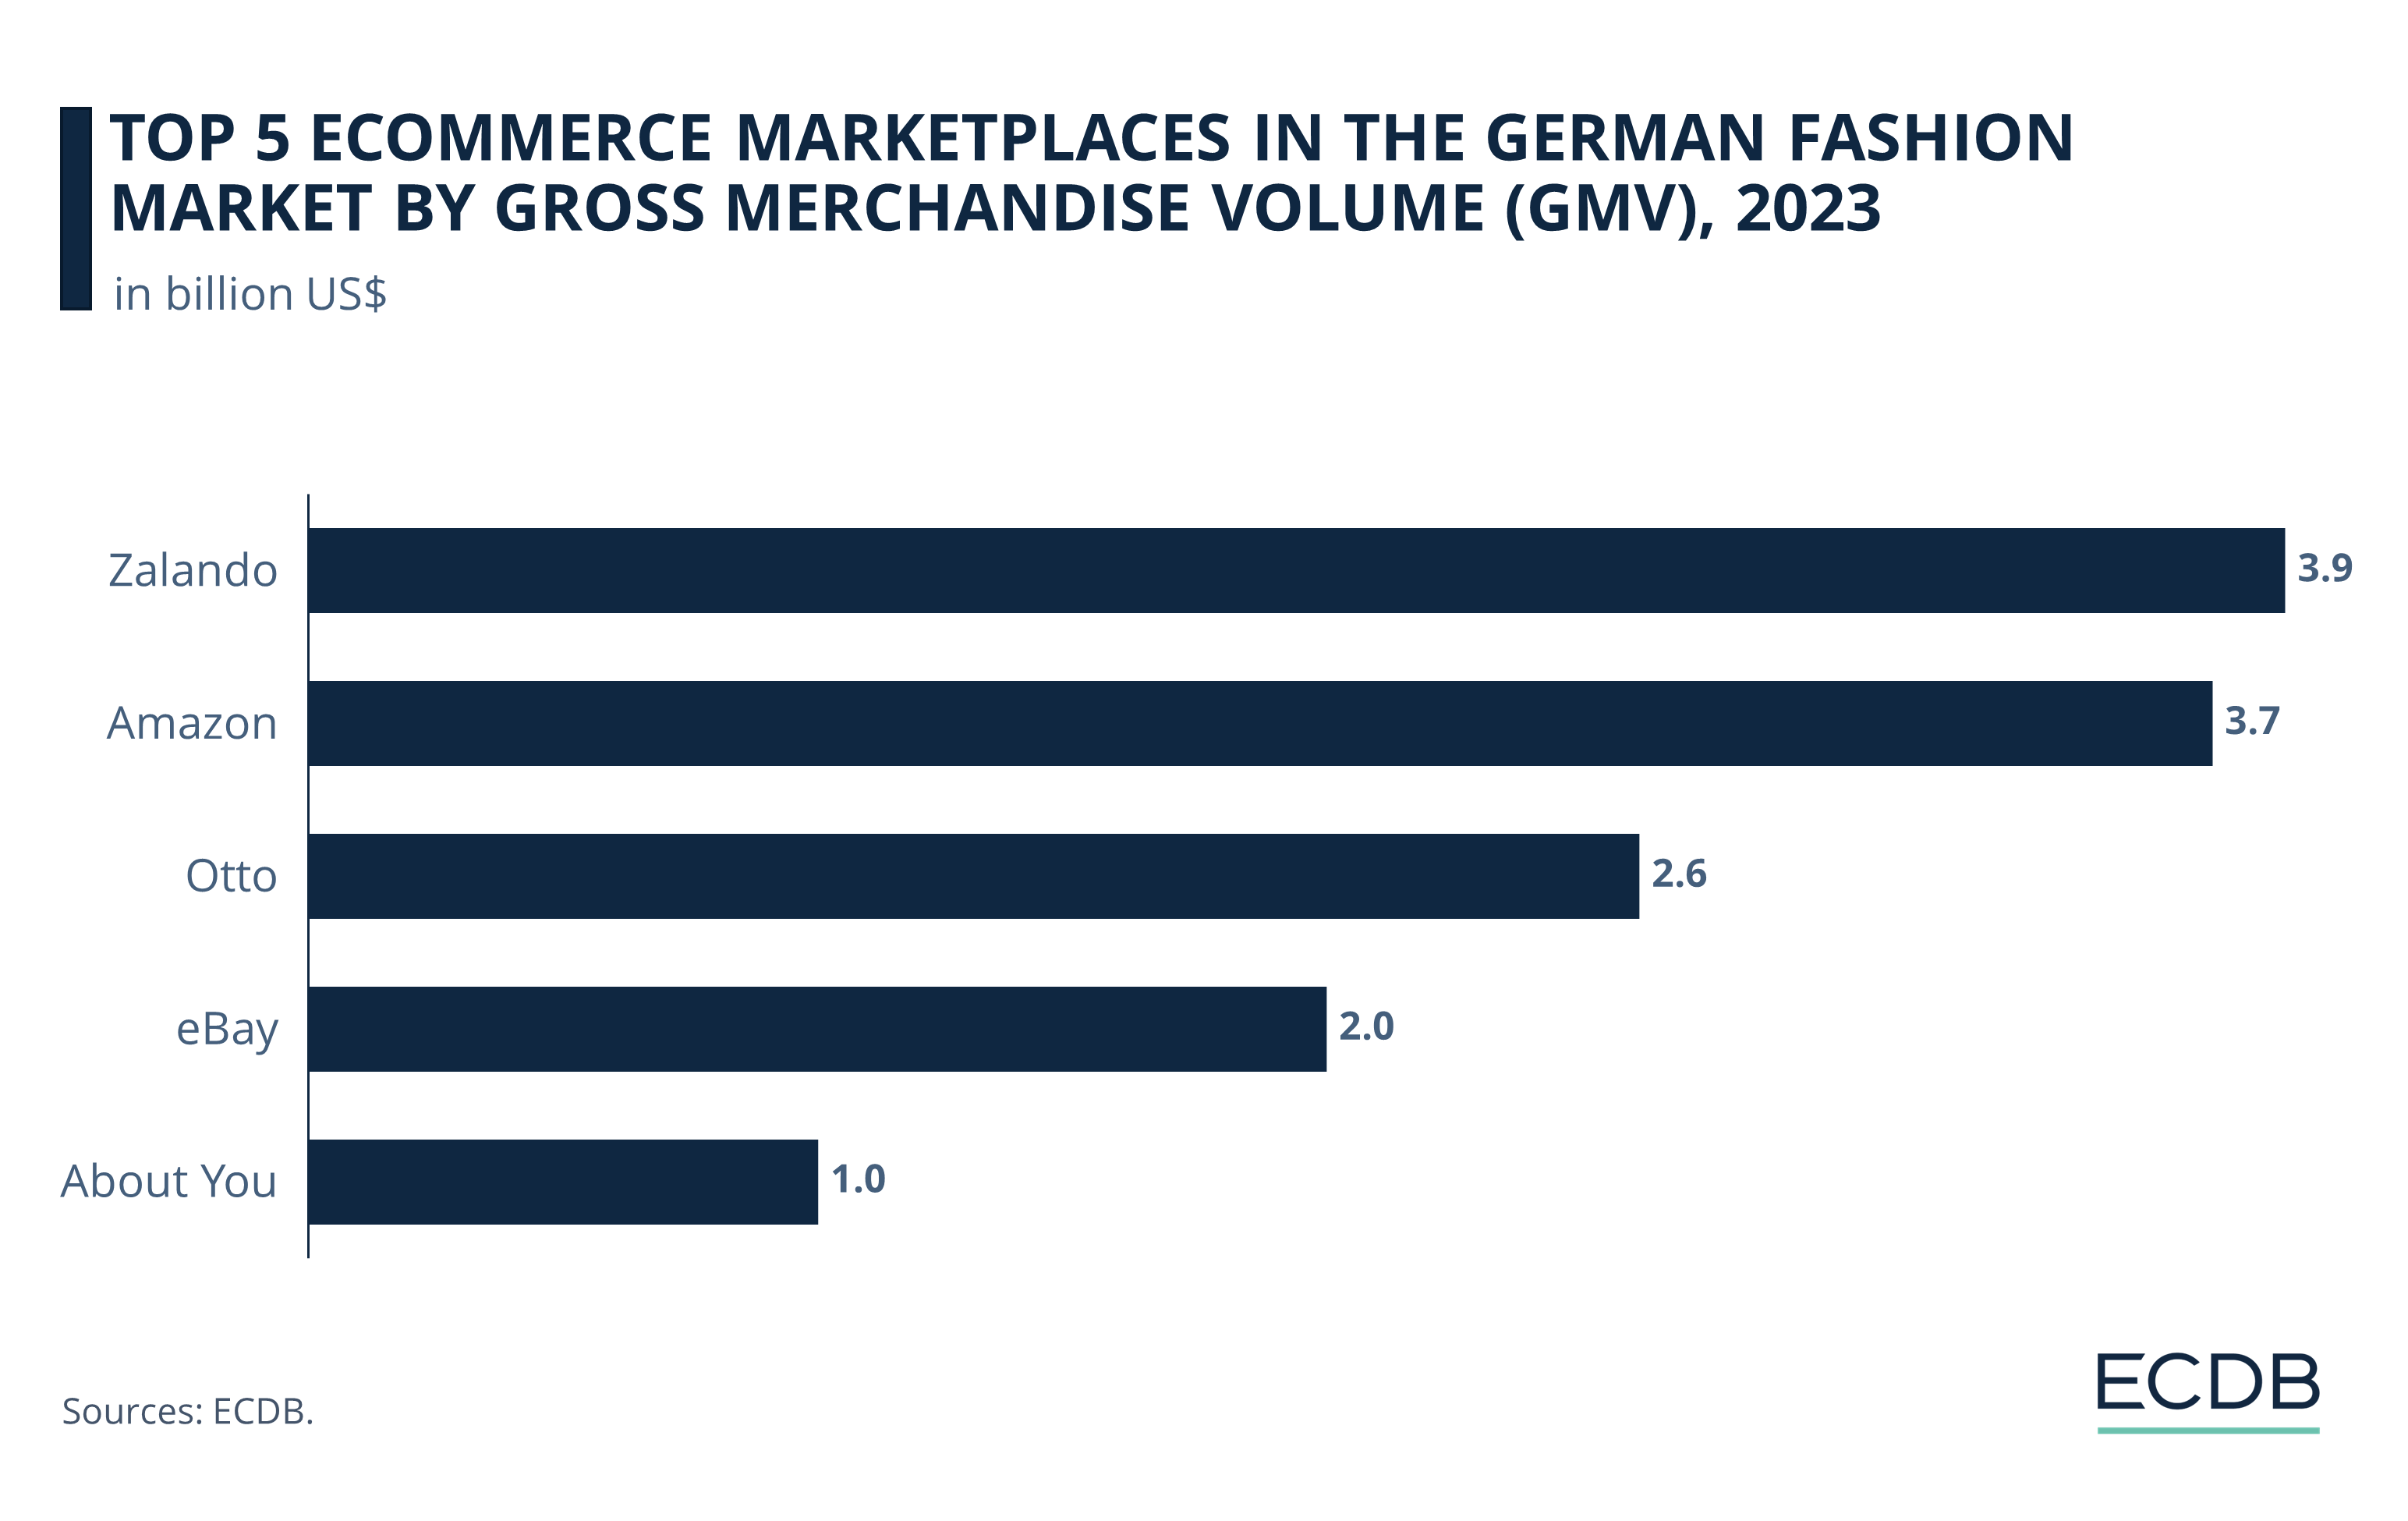 Top 5 Fashion eCommerce Marketplaces in the German Fashion Market by GMV, 2023